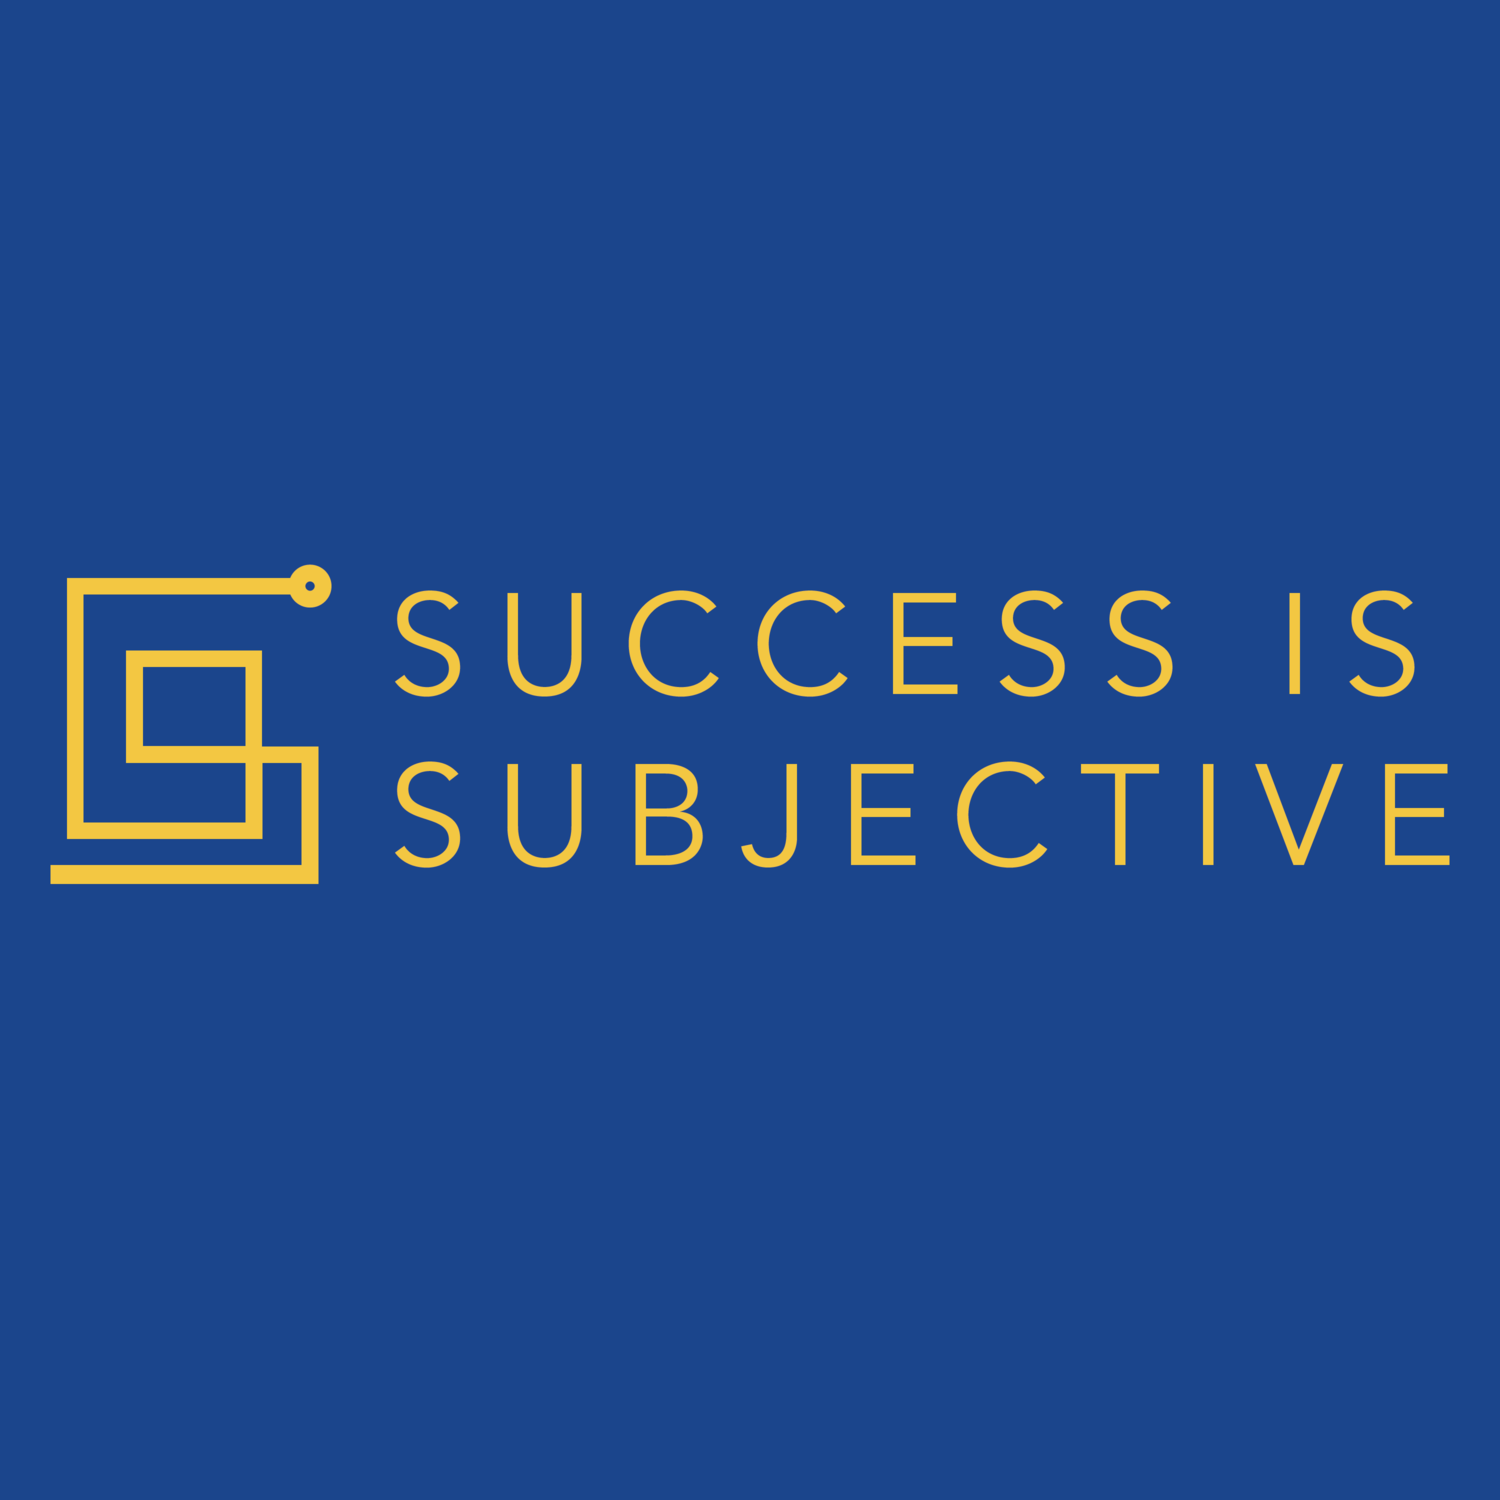 Success is Subjective